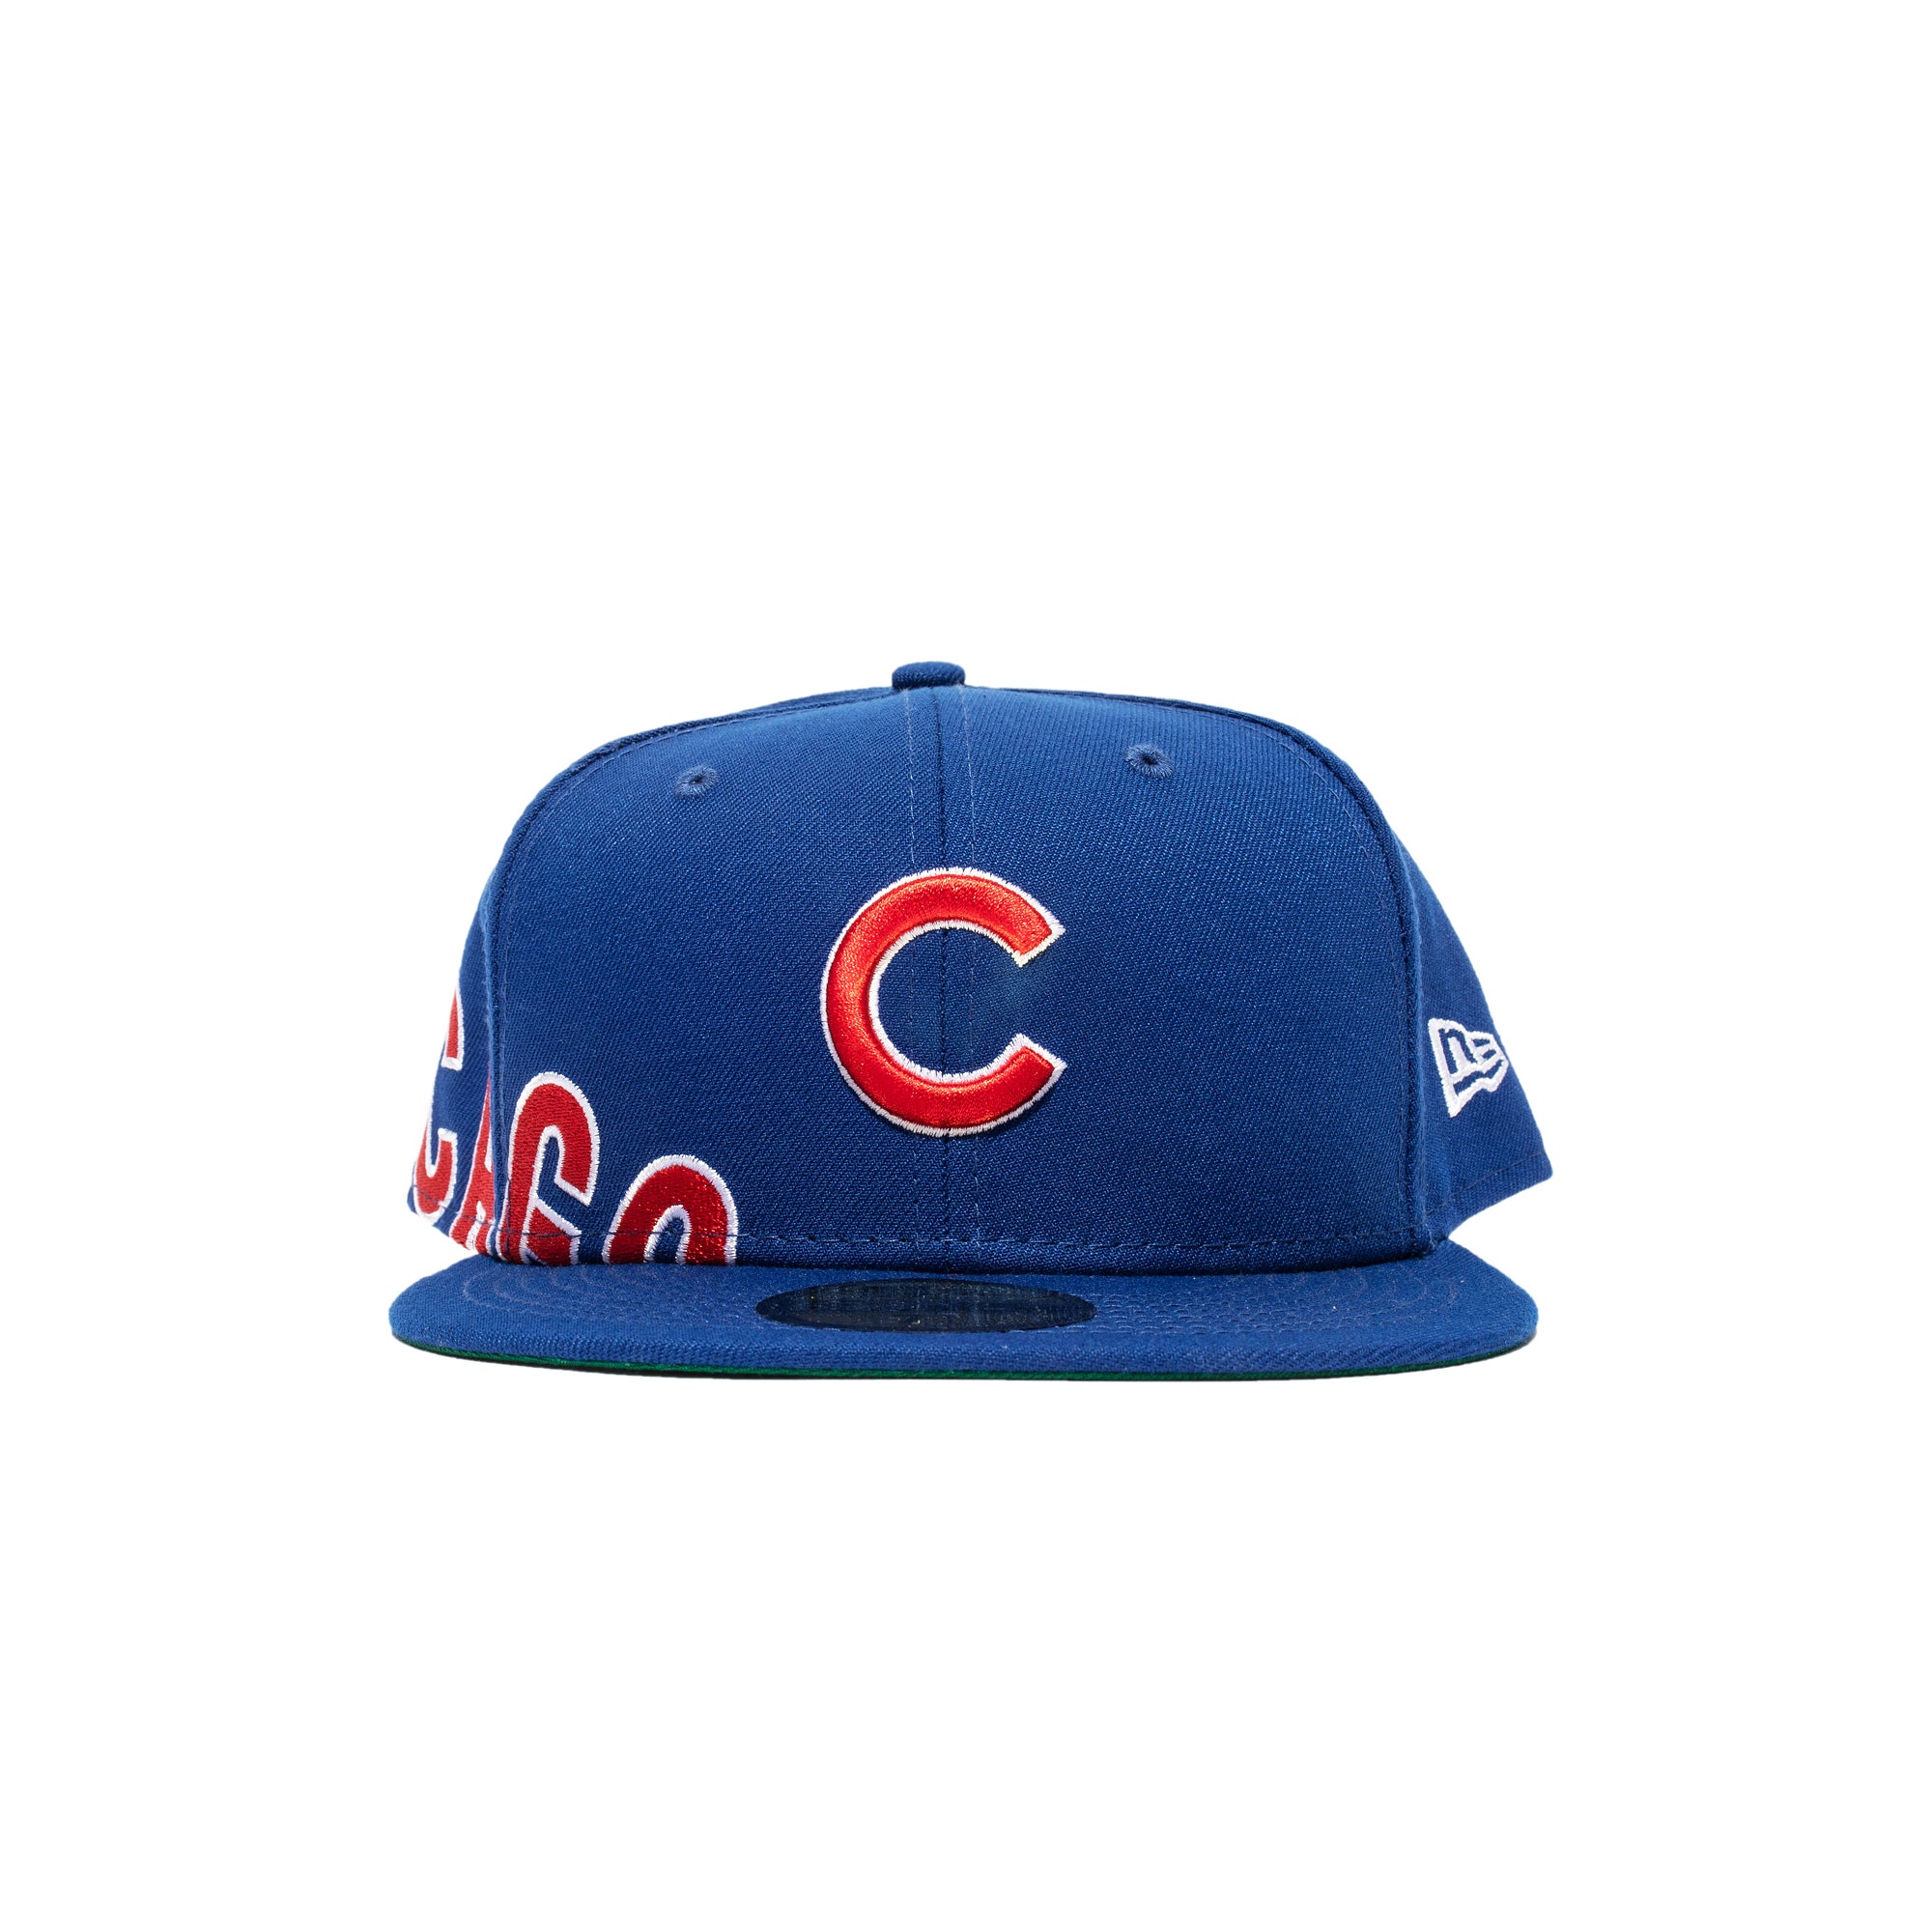 Chicago Cubs New Era Golfer Tee 9FIFTY Snapback Hat - White